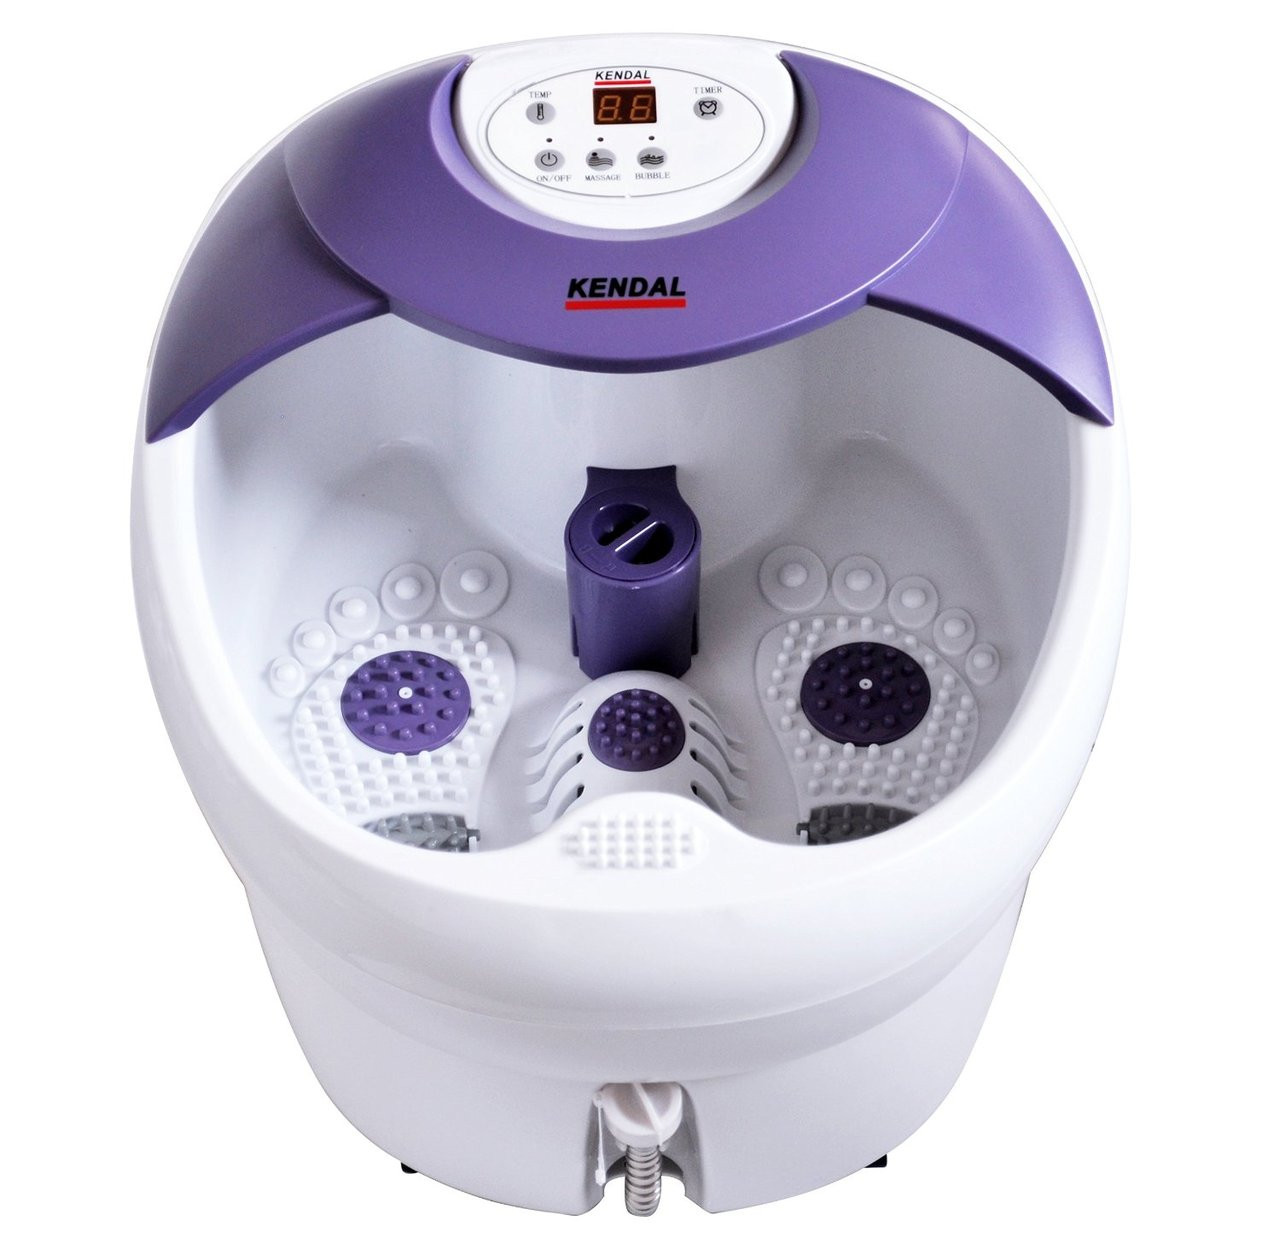 Kendal All-In-One Foot Spa MS0809M